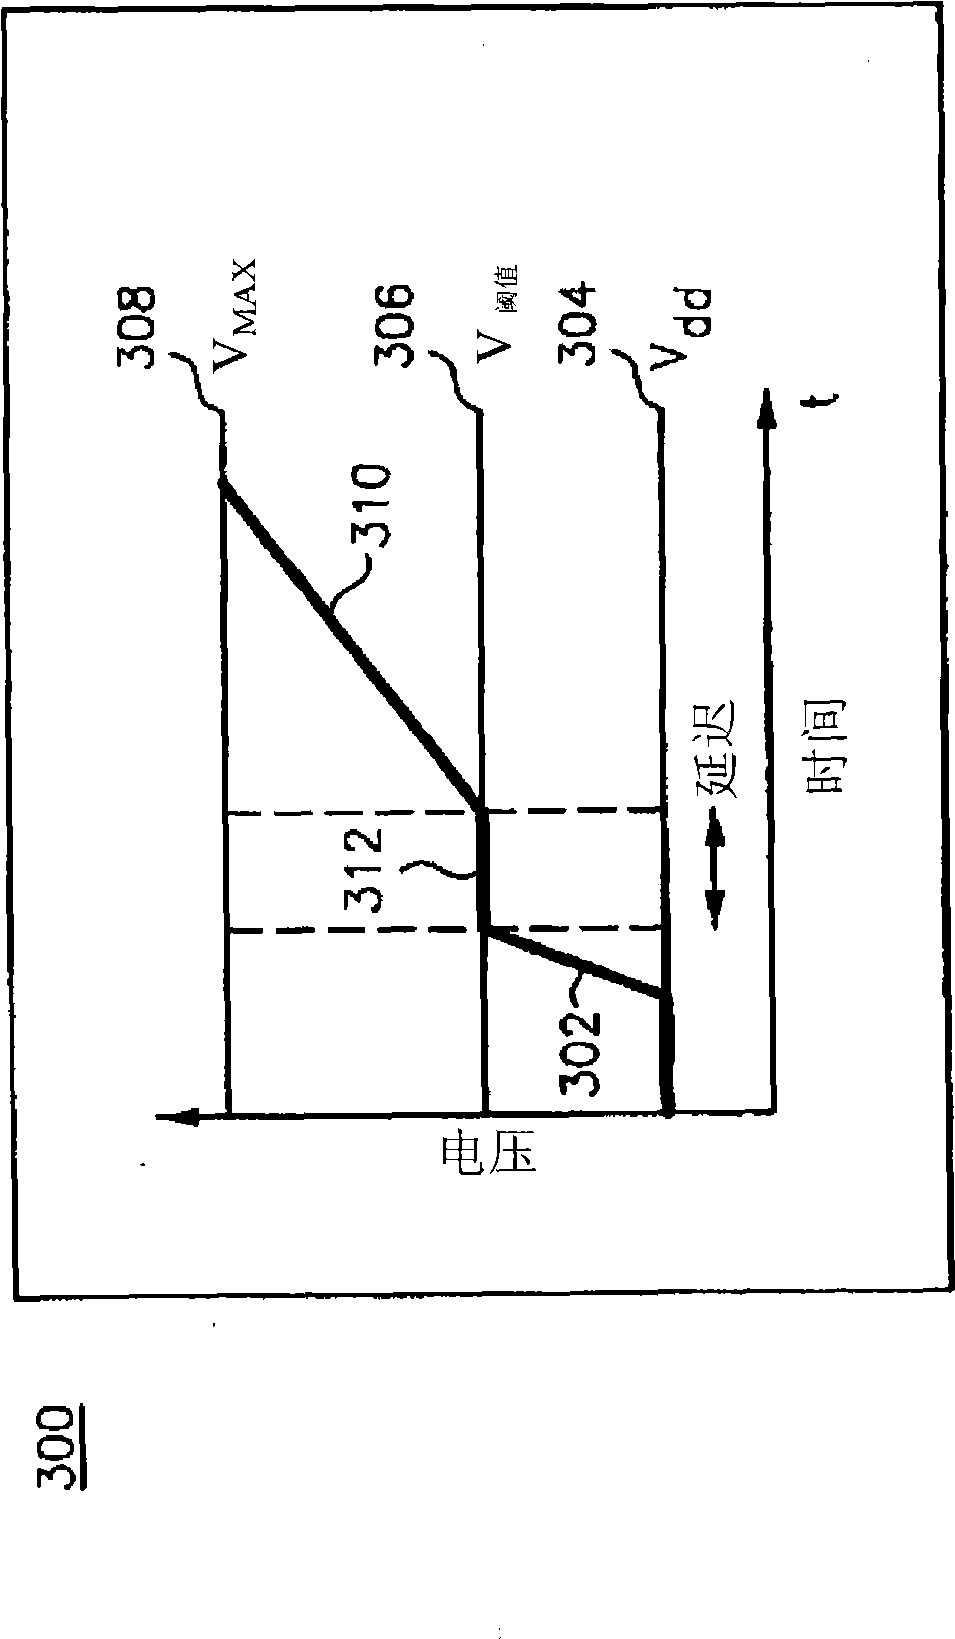 Apparatus and method for charge pump slew rate control